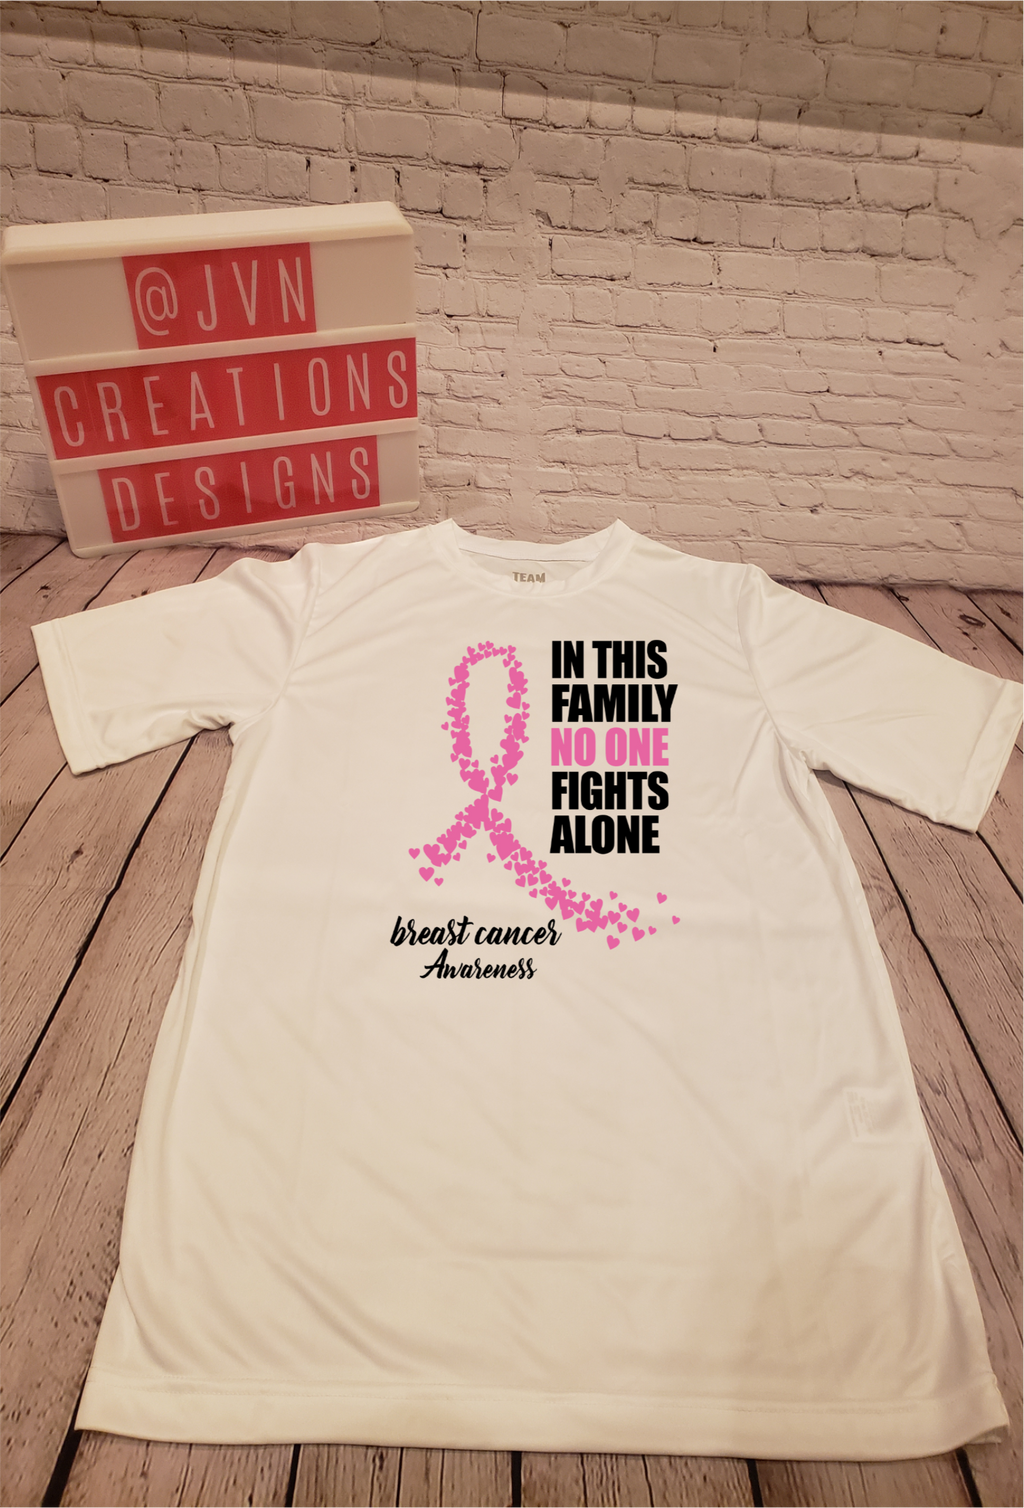 No One Fights Alone Breast Cancer Awareness - JVN Creations & Designs